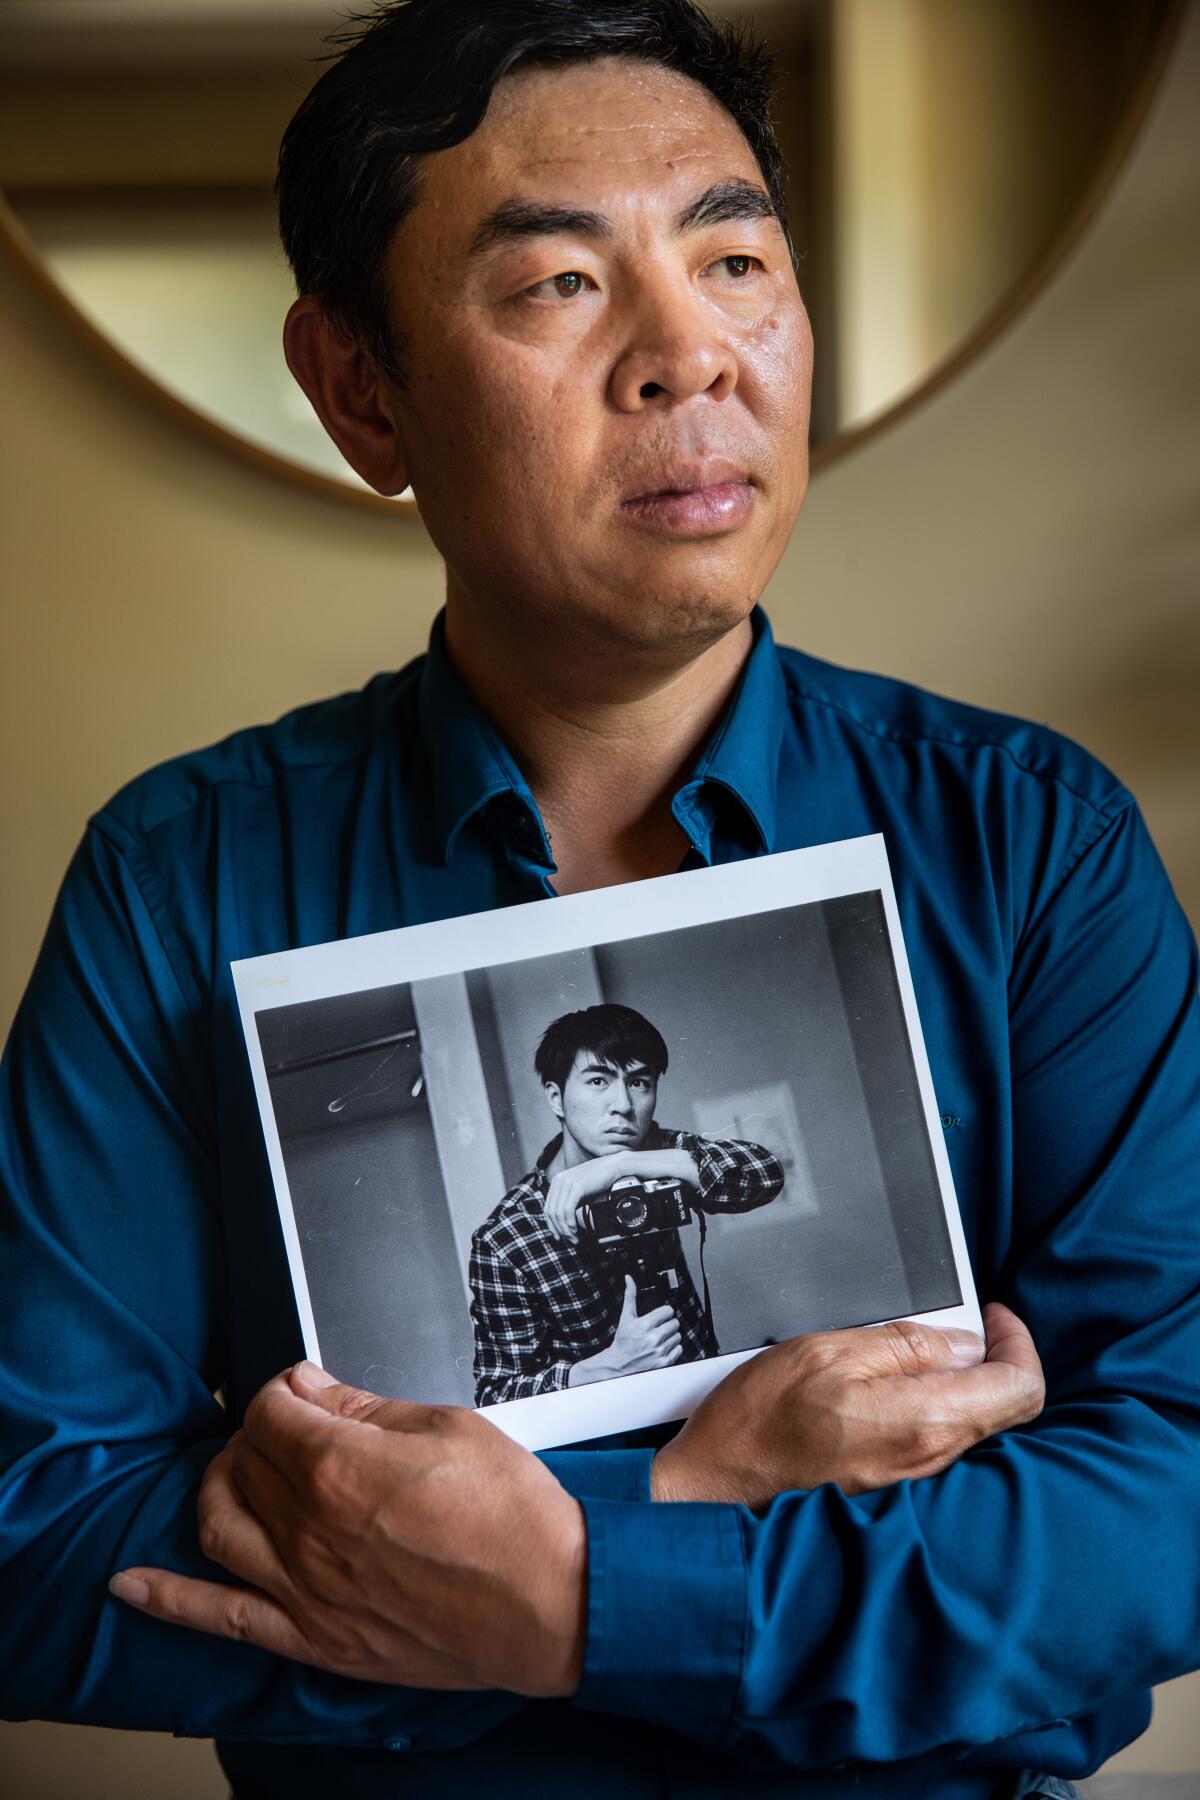 Hualun Wang, father of Peng Wang, is photographed holding a selfie-portrait of his son.